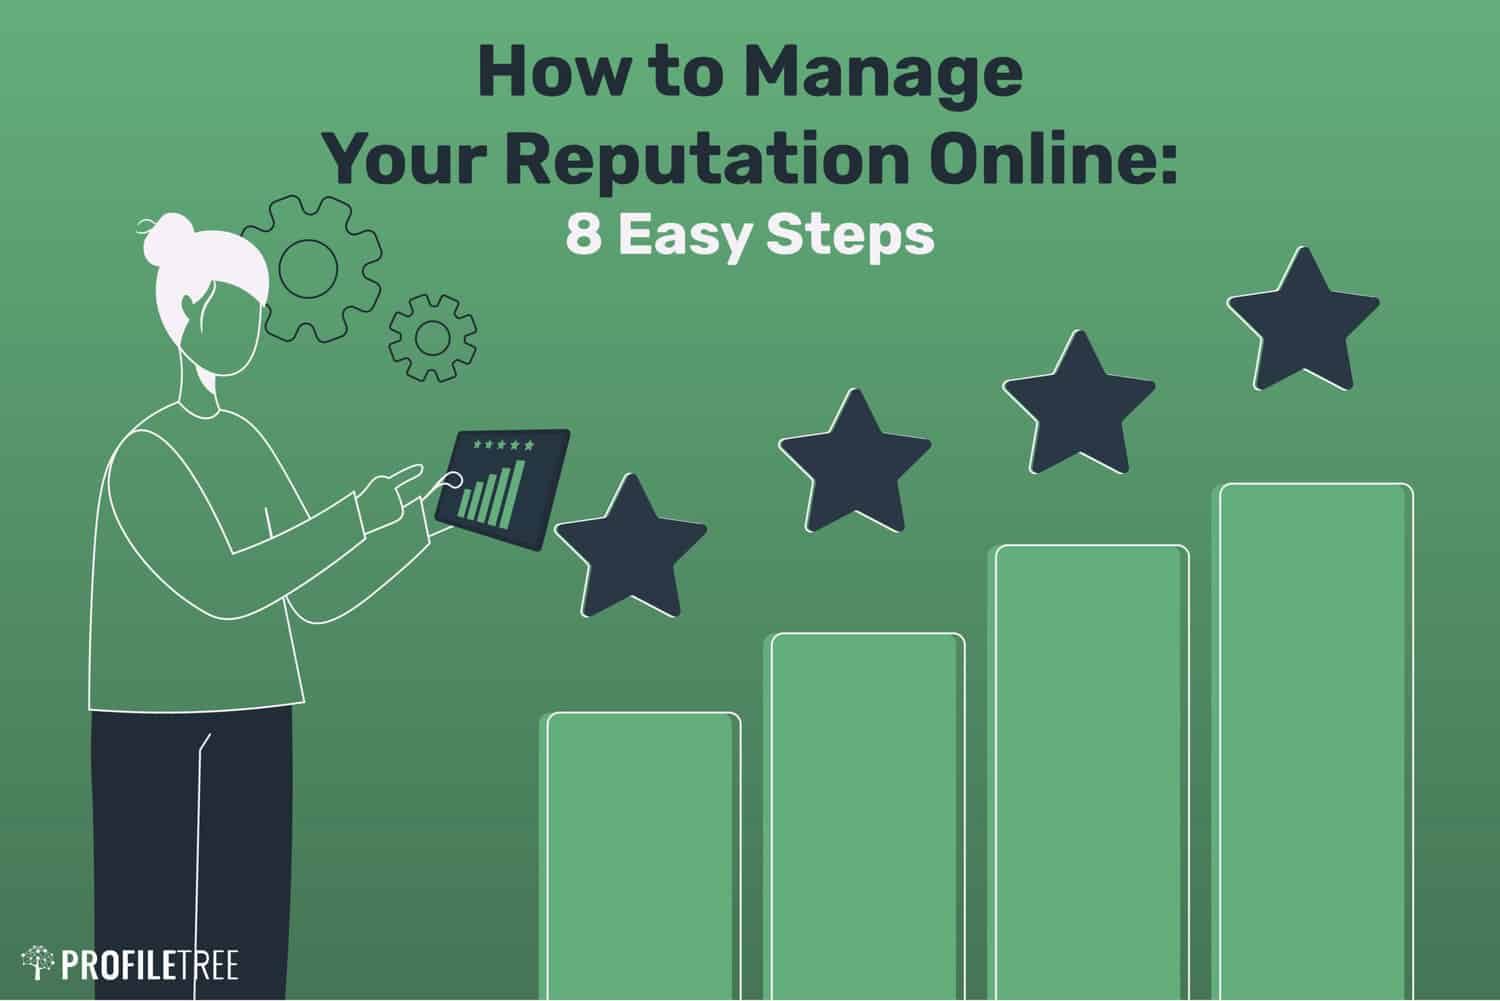 How to Manage Your Reputation Online 8 Easy Steps